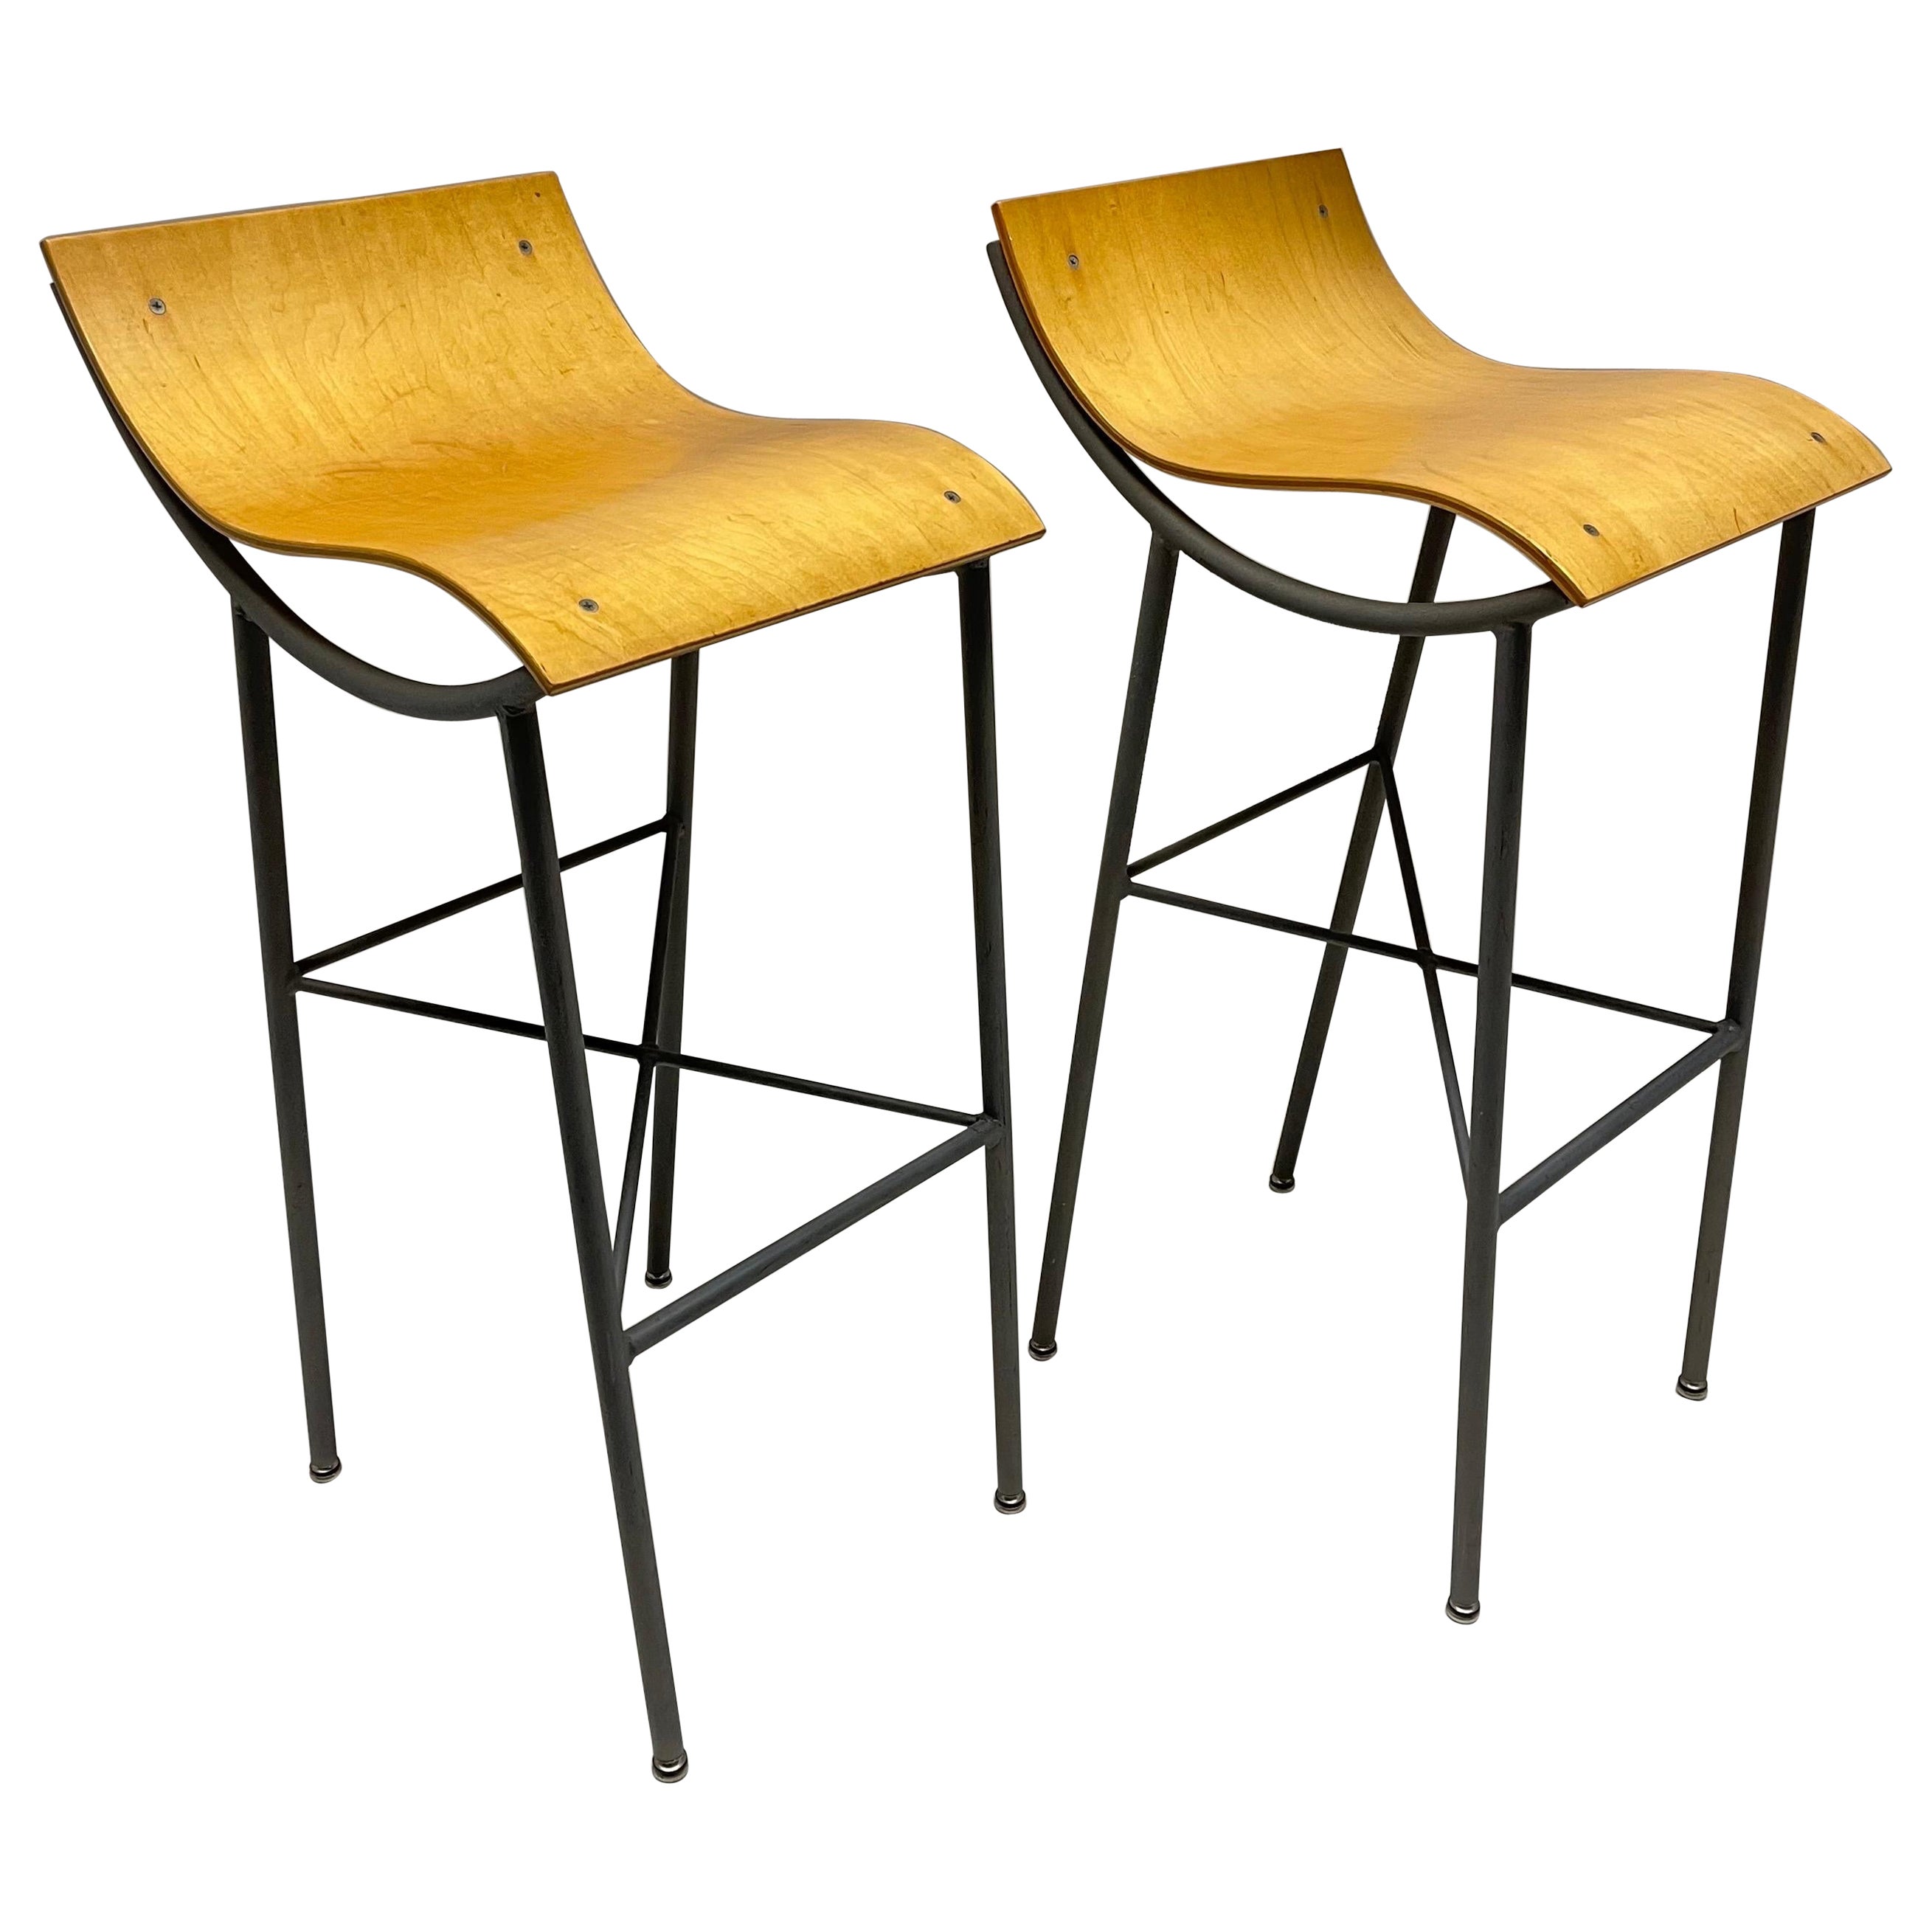 Pair of Post Modern Sculptural Steel and Bent Plywood Bar Stools, circa 1980s For Sale